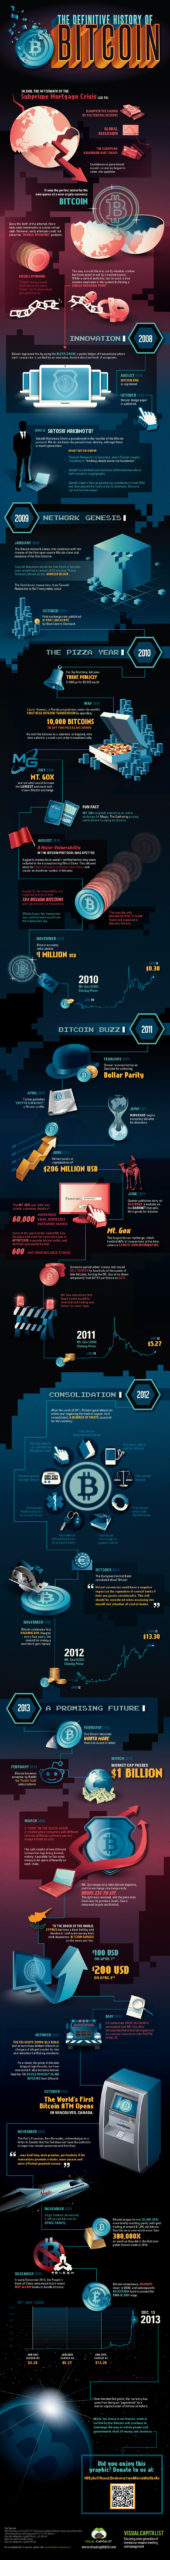 A Quick And Complete History Of Bitcoin So You’re Not Totally Lost